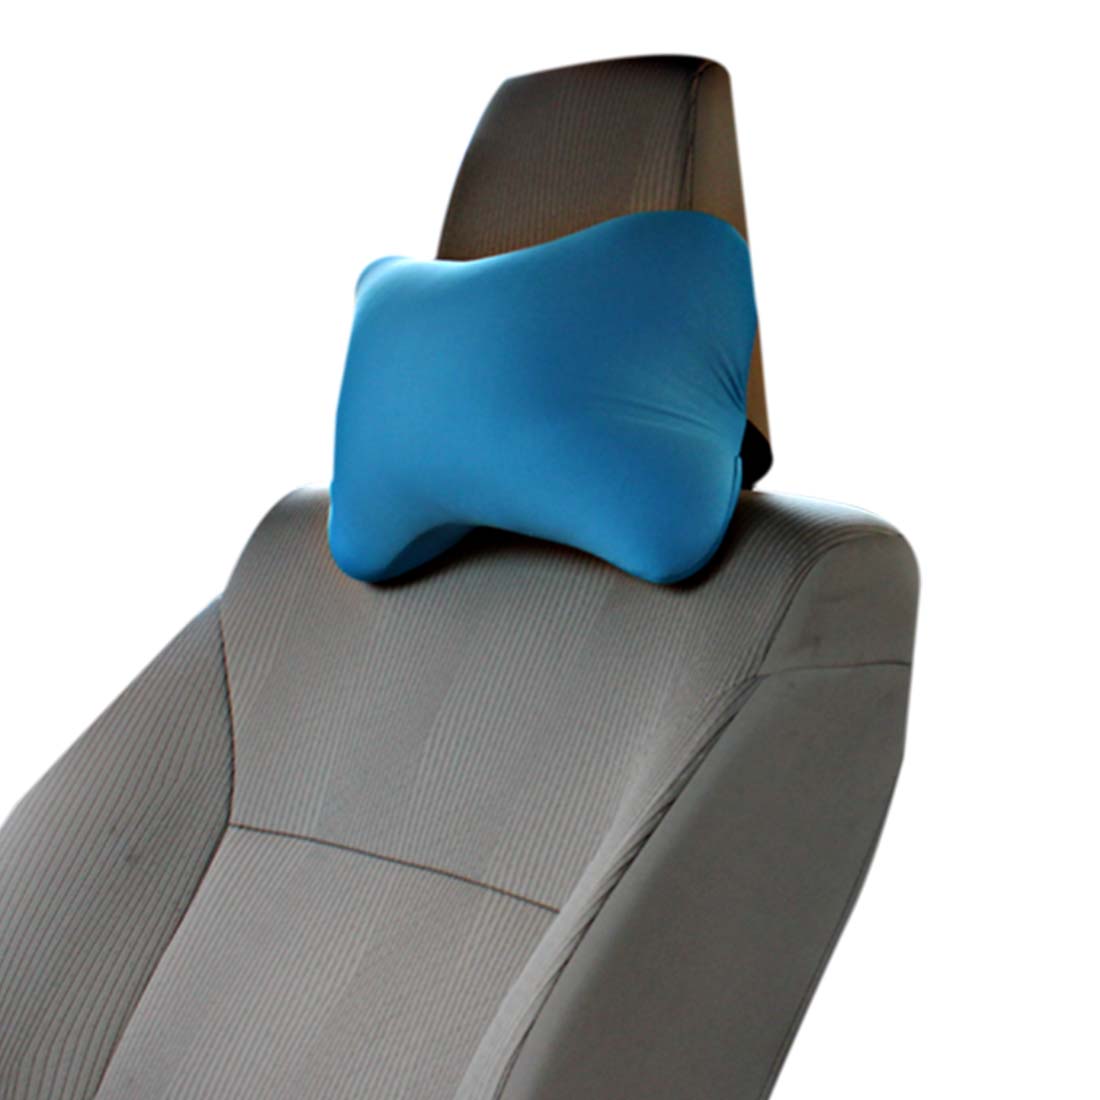 ORKA Classic Car Neckrest Pillow Filled With Microbeads [Pack Of 2] - Sky Blue  